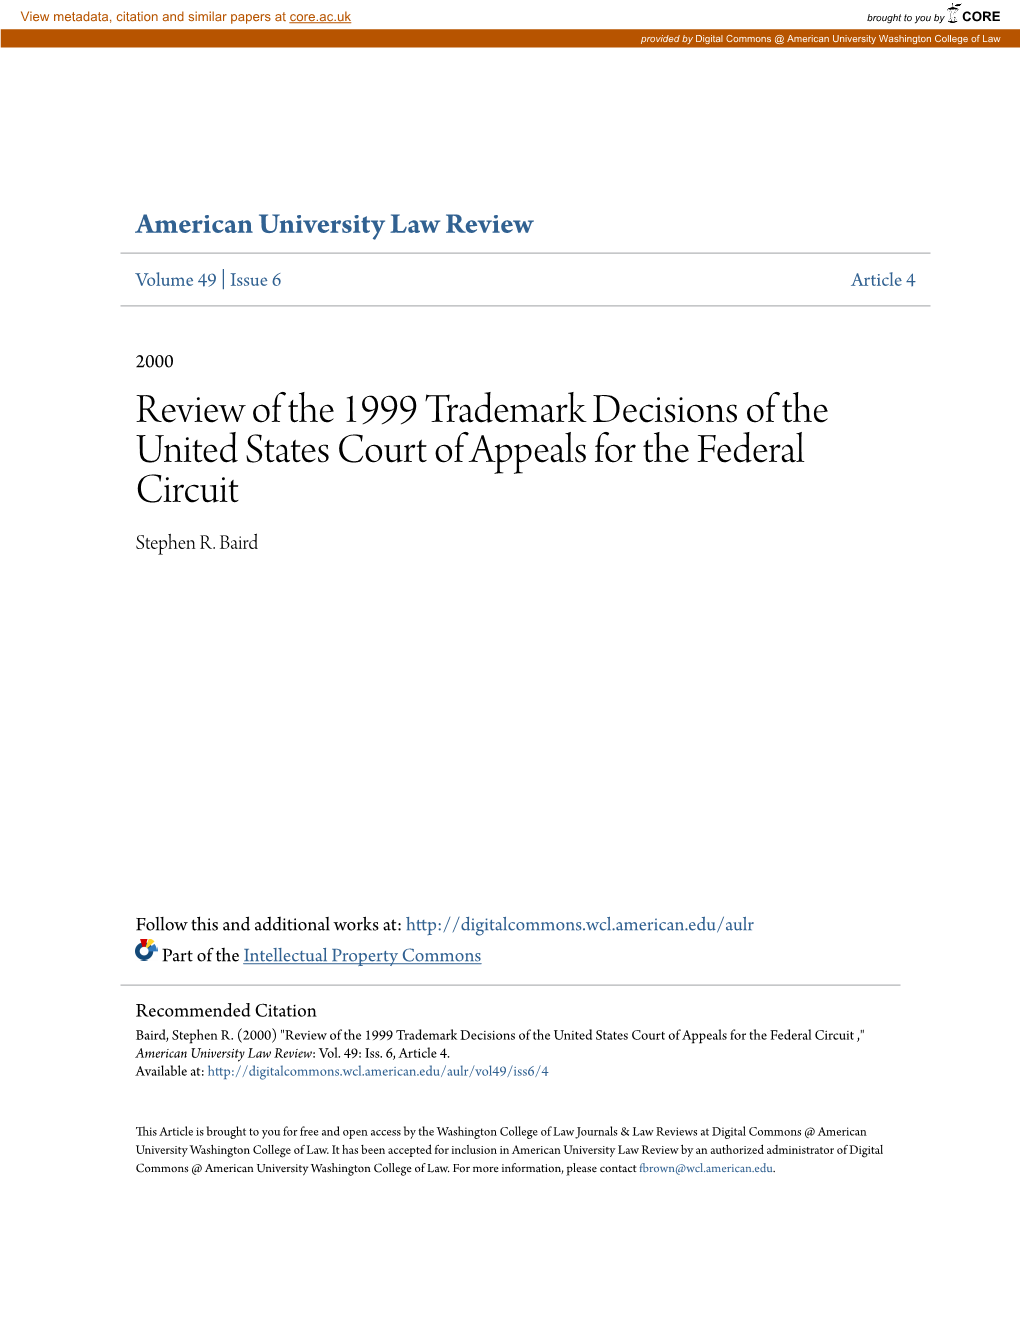 Review of the 1999 Trademark Decisions of the United States Court of Appeals for the Federal Circuit Stephen R